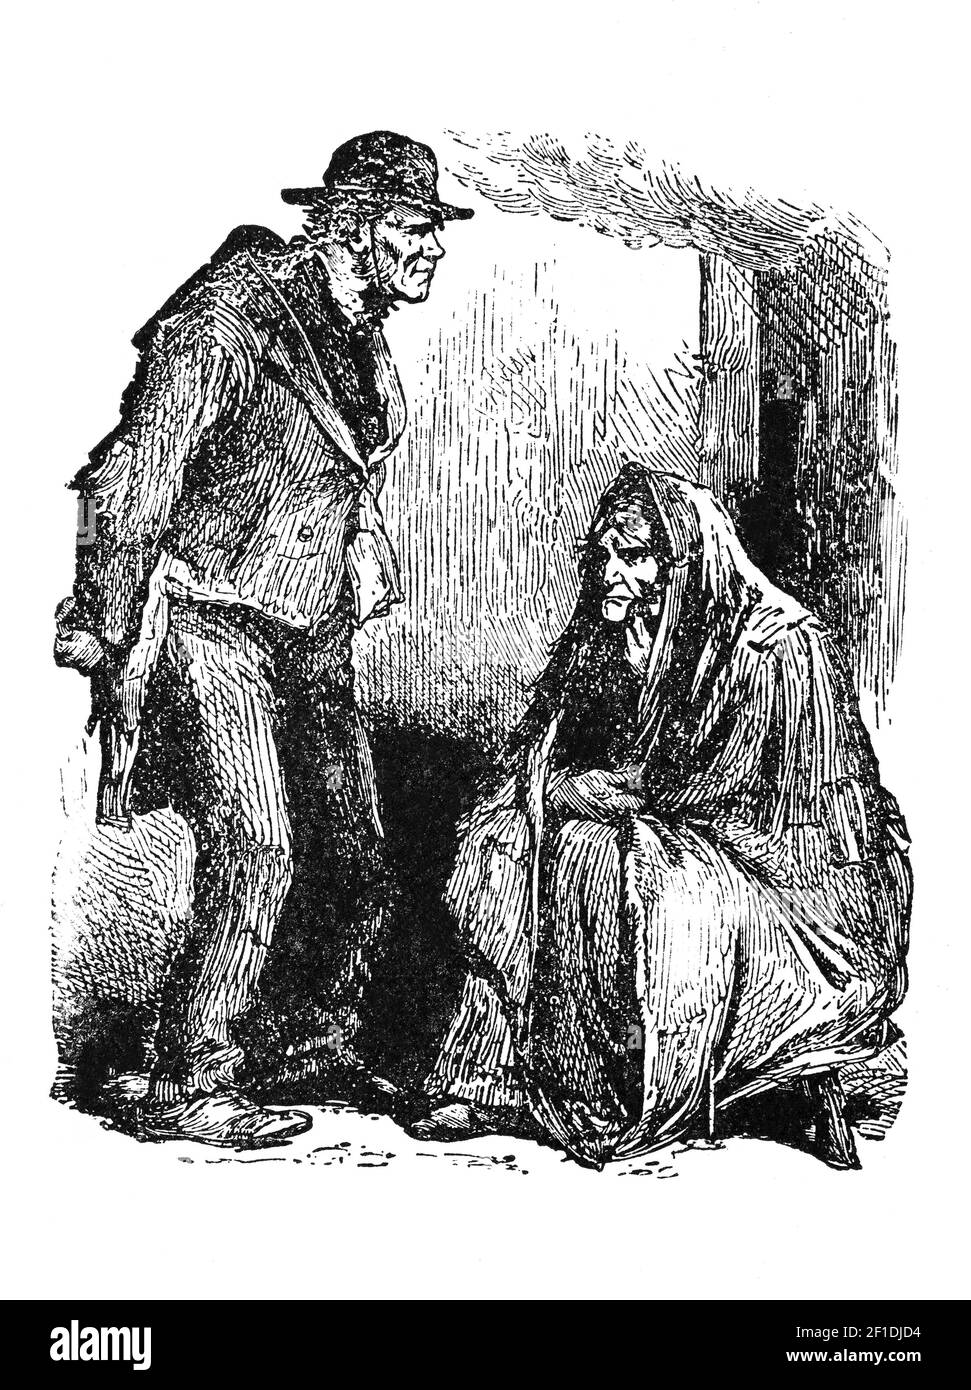 A 19th Century illustration/cartoon of the King of the Claddagh. He was the leader of the Claddagh community in Galway City, Ireland,  who was charged with being the arbiter in any disputes. A new king was chosen on St. John's Day, 23rd June. Stock Photo